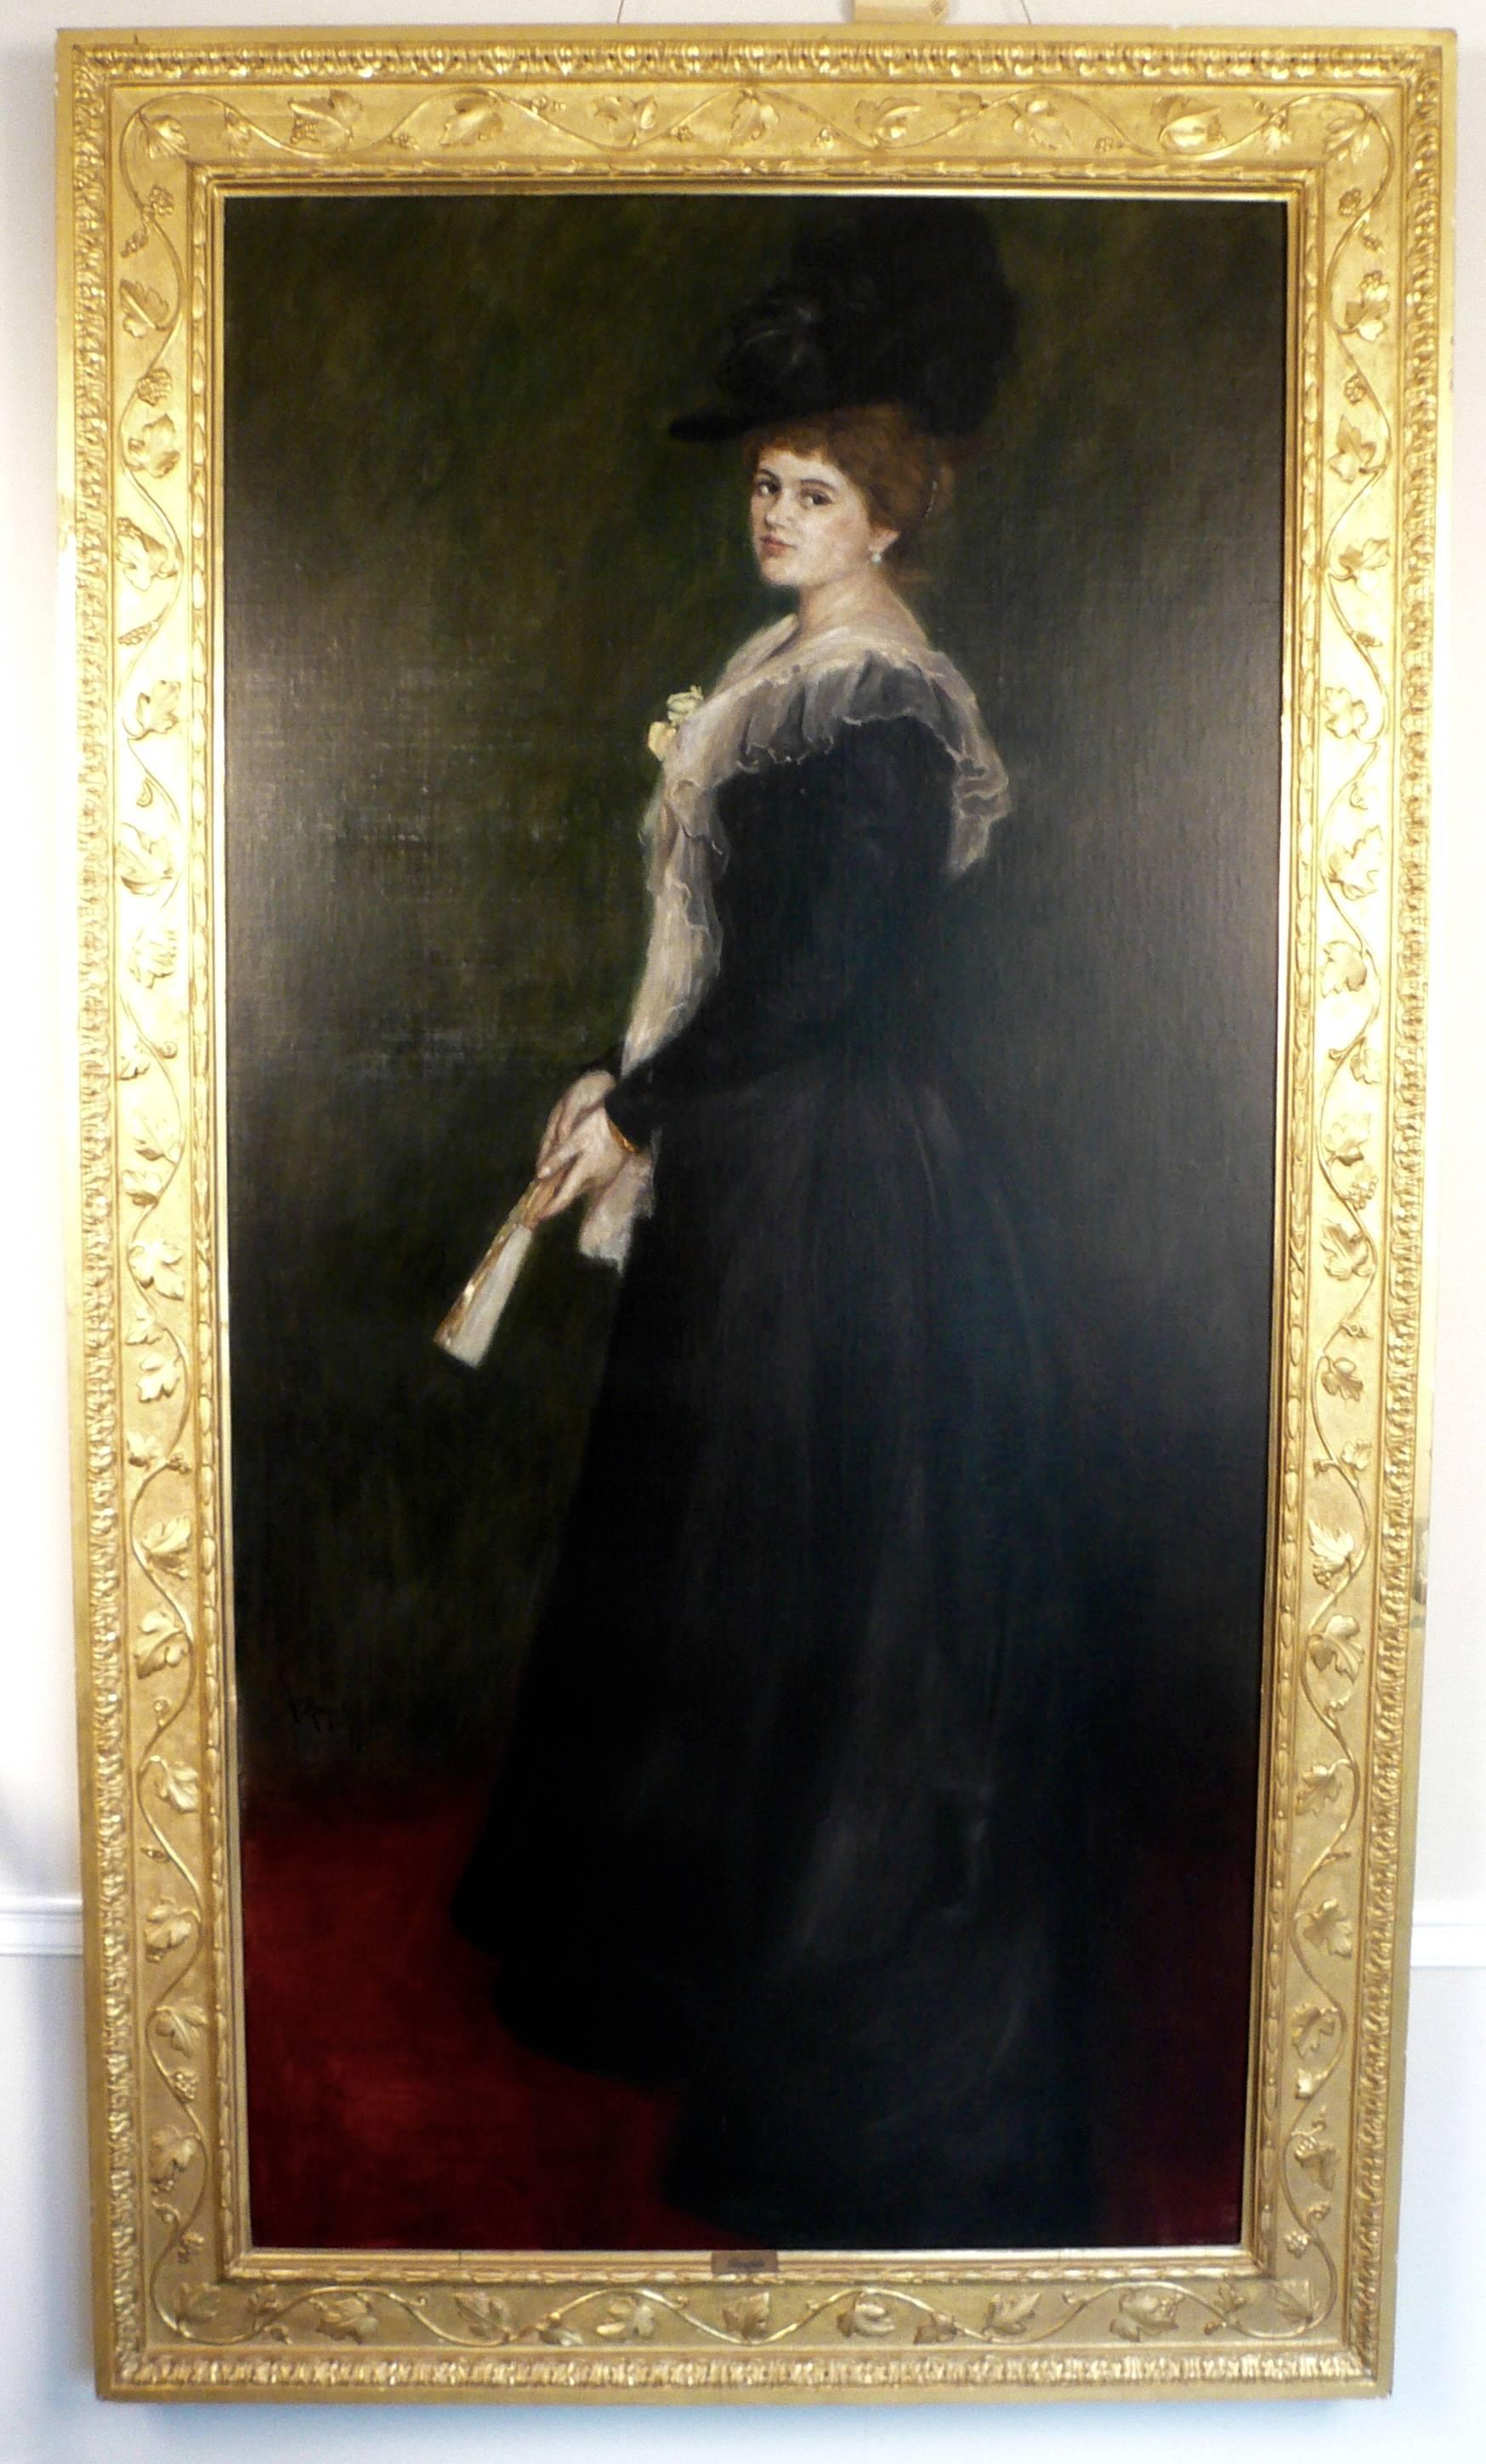 Belle Époque Gilded Age Portrait of a Lady with Fan, Signed A. Roegels, 1899